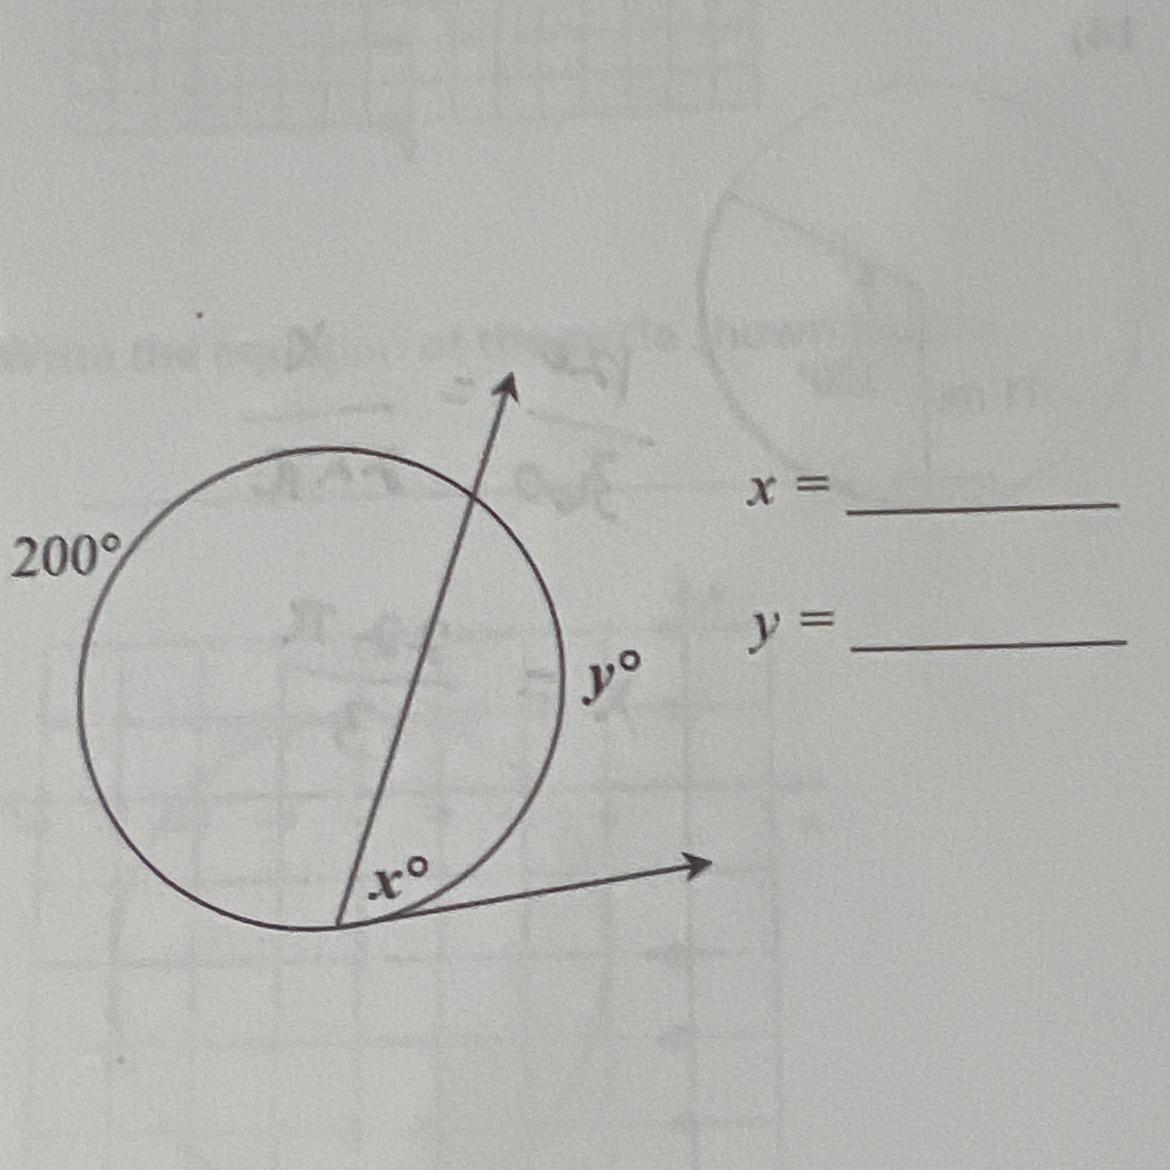 How Do I Solve For X And Y?